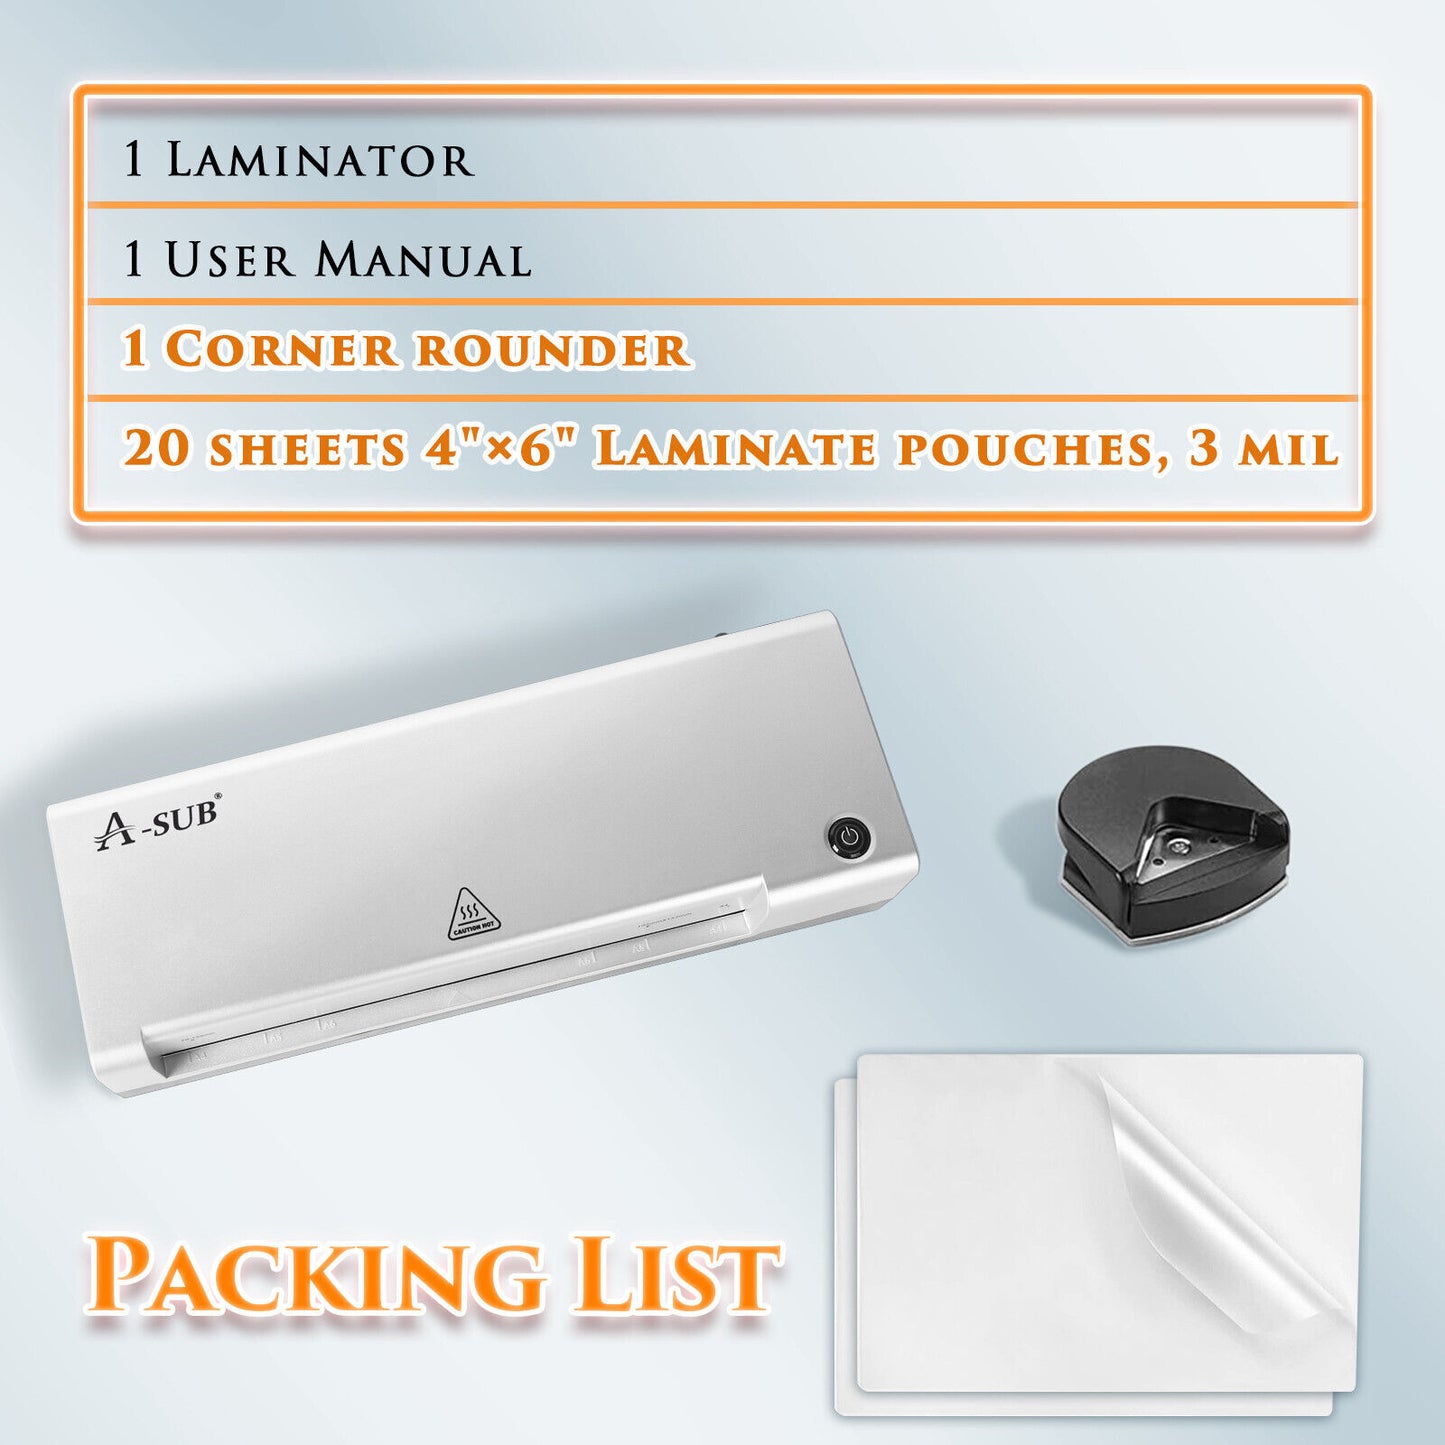 A-SUB 4 in 1 A4 Laminator Thermal Laminating Machine 9 Inch+ 20 Pouch + Corner Rounder